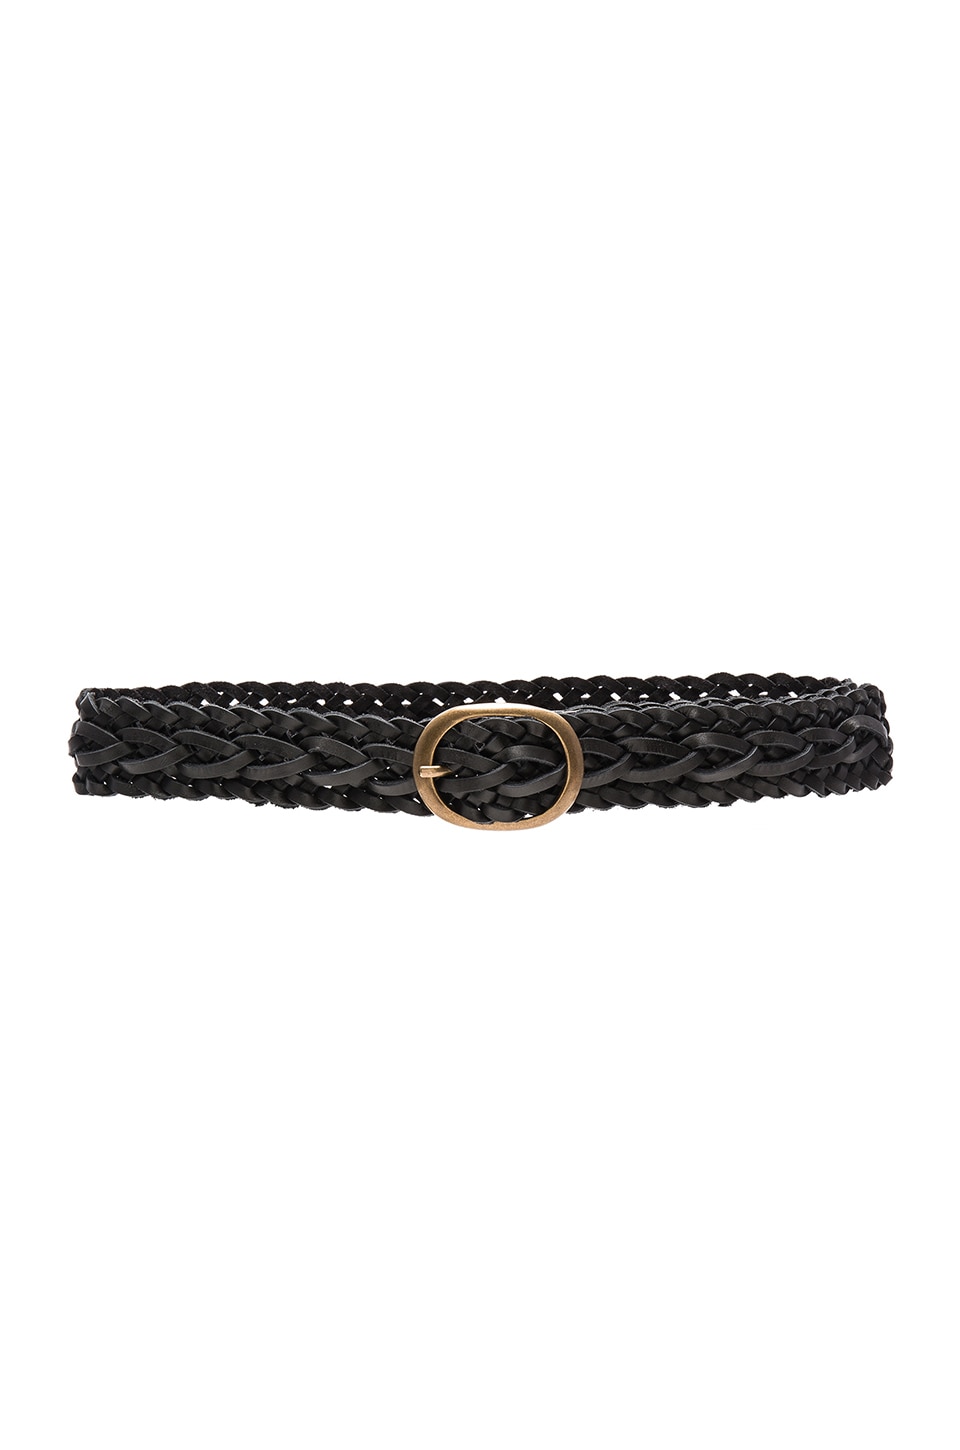 Lovers and Friends Winslow Braided Belt in Black | REVOLVE